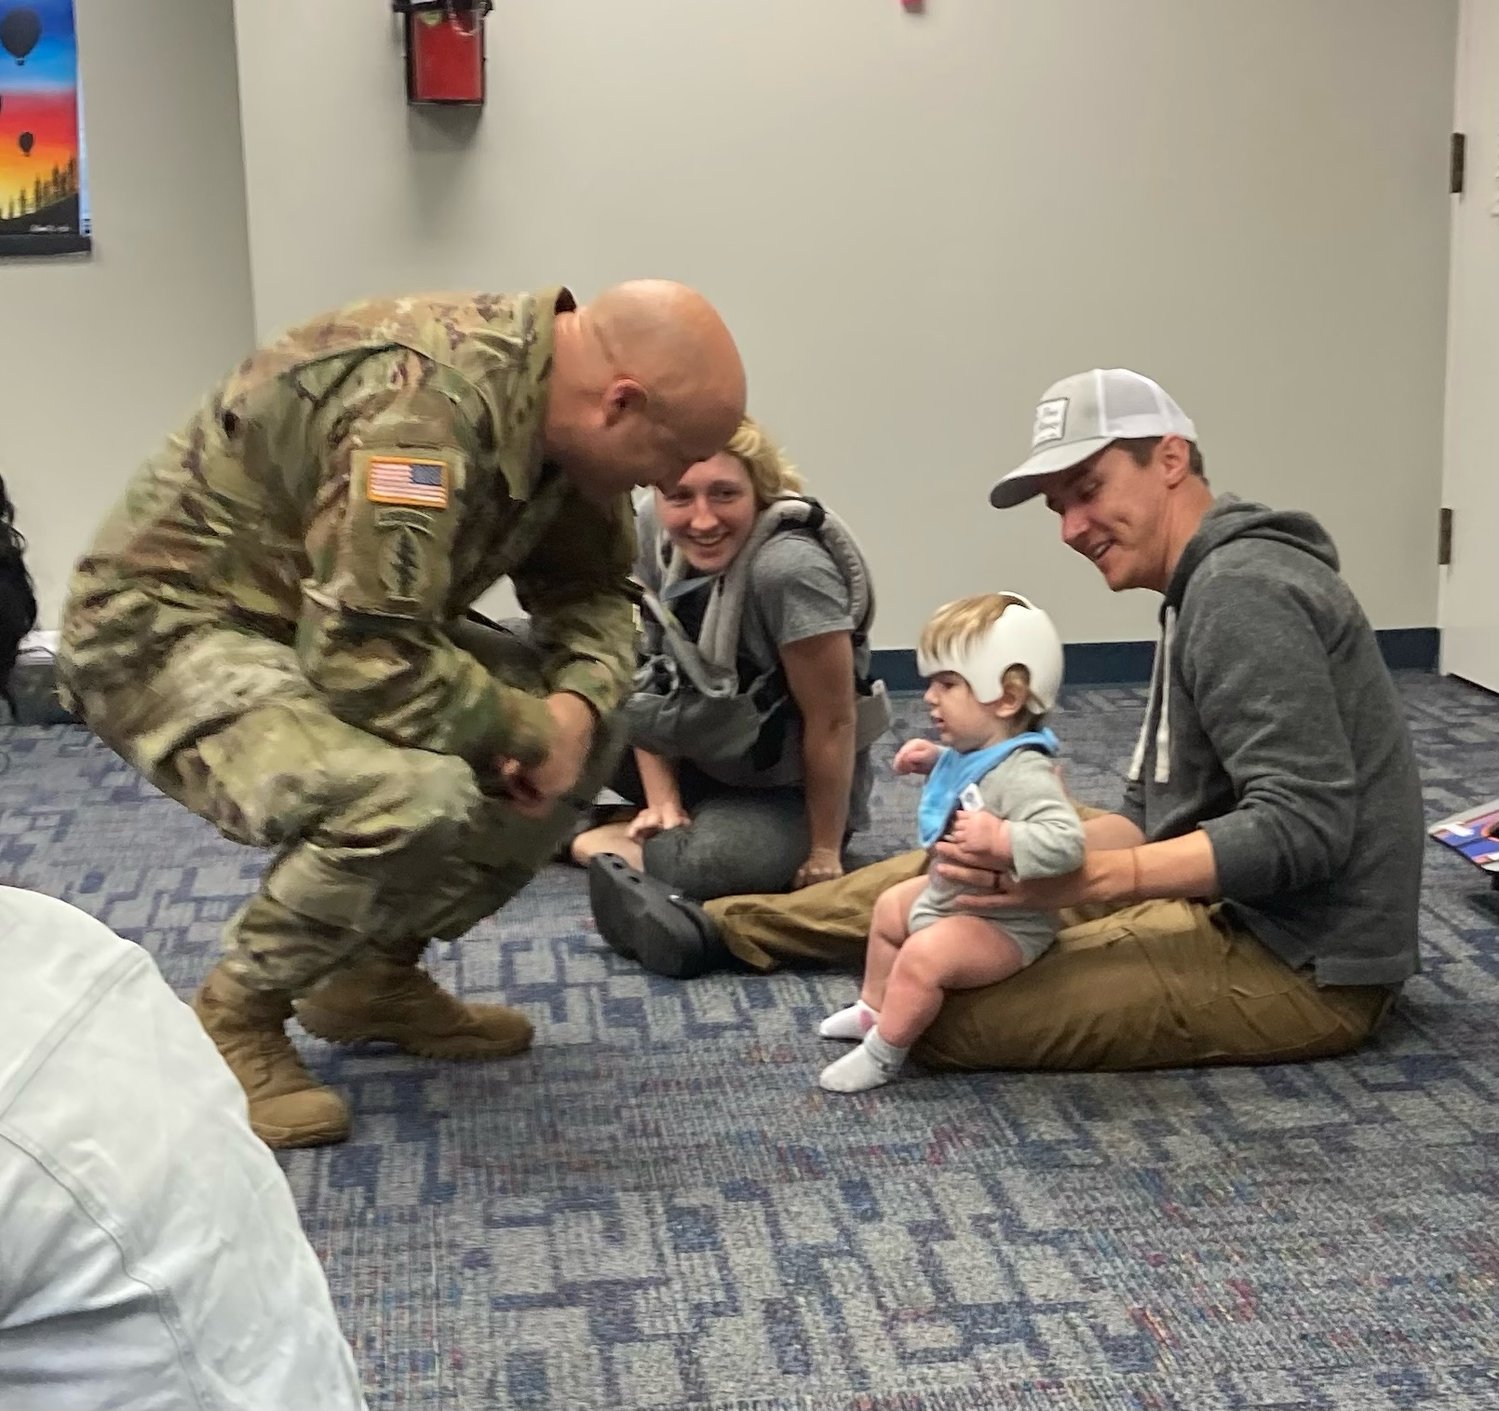 Col. John Wilcox, the Fort Bragg garrison commander, greets storytime visitors to Throckmorton Library on Wednesday. The library celebrated 25 years of serving the Fort Bragg community.